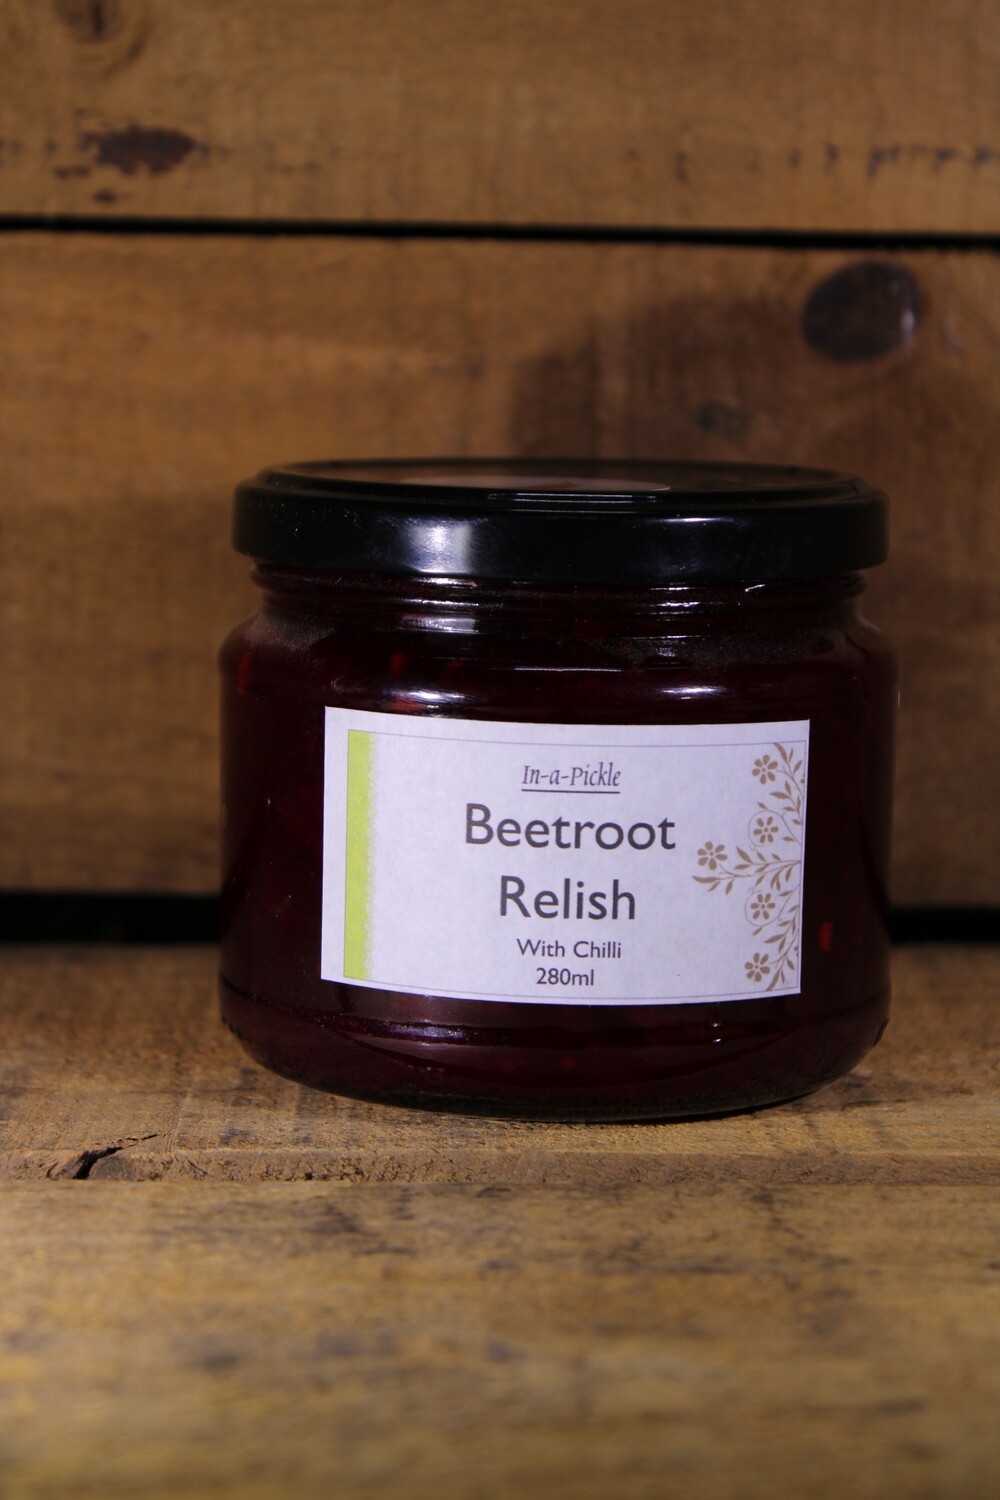 Beetroot Relish with Chilli